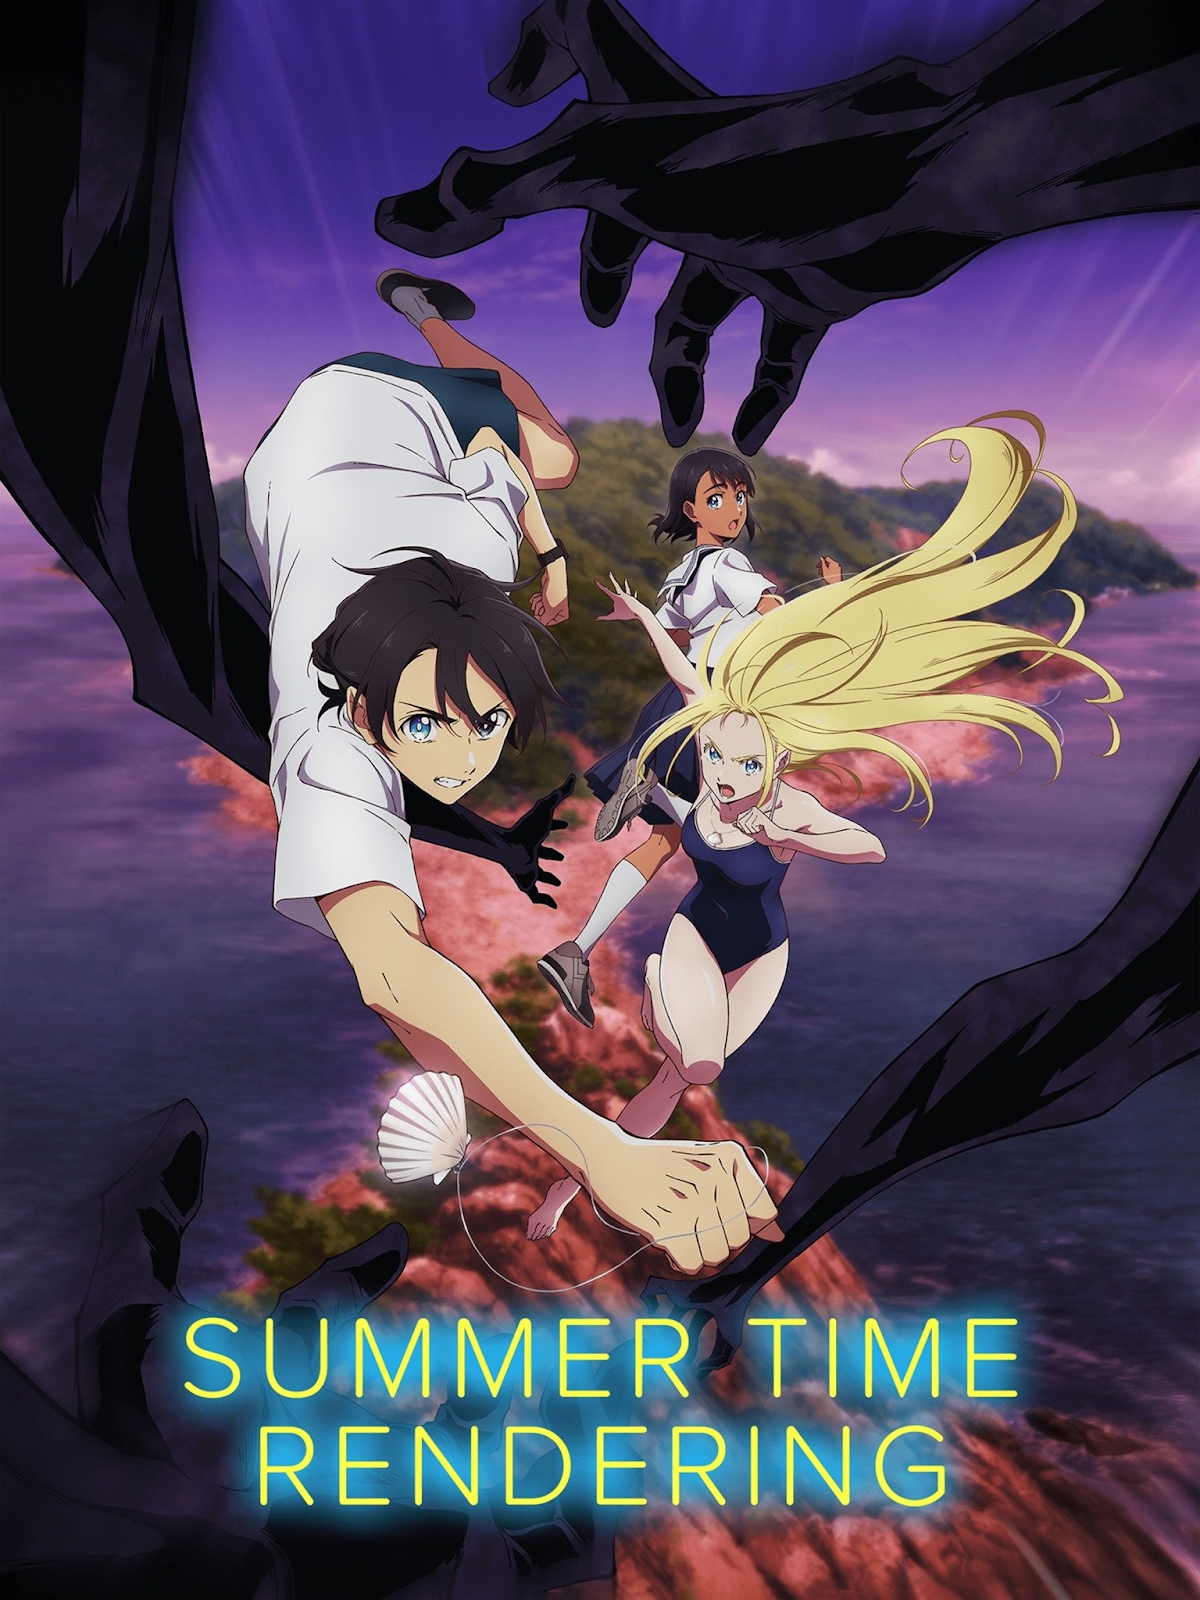 Summer Time Rendering or Erased: Which is the Better Supernatural